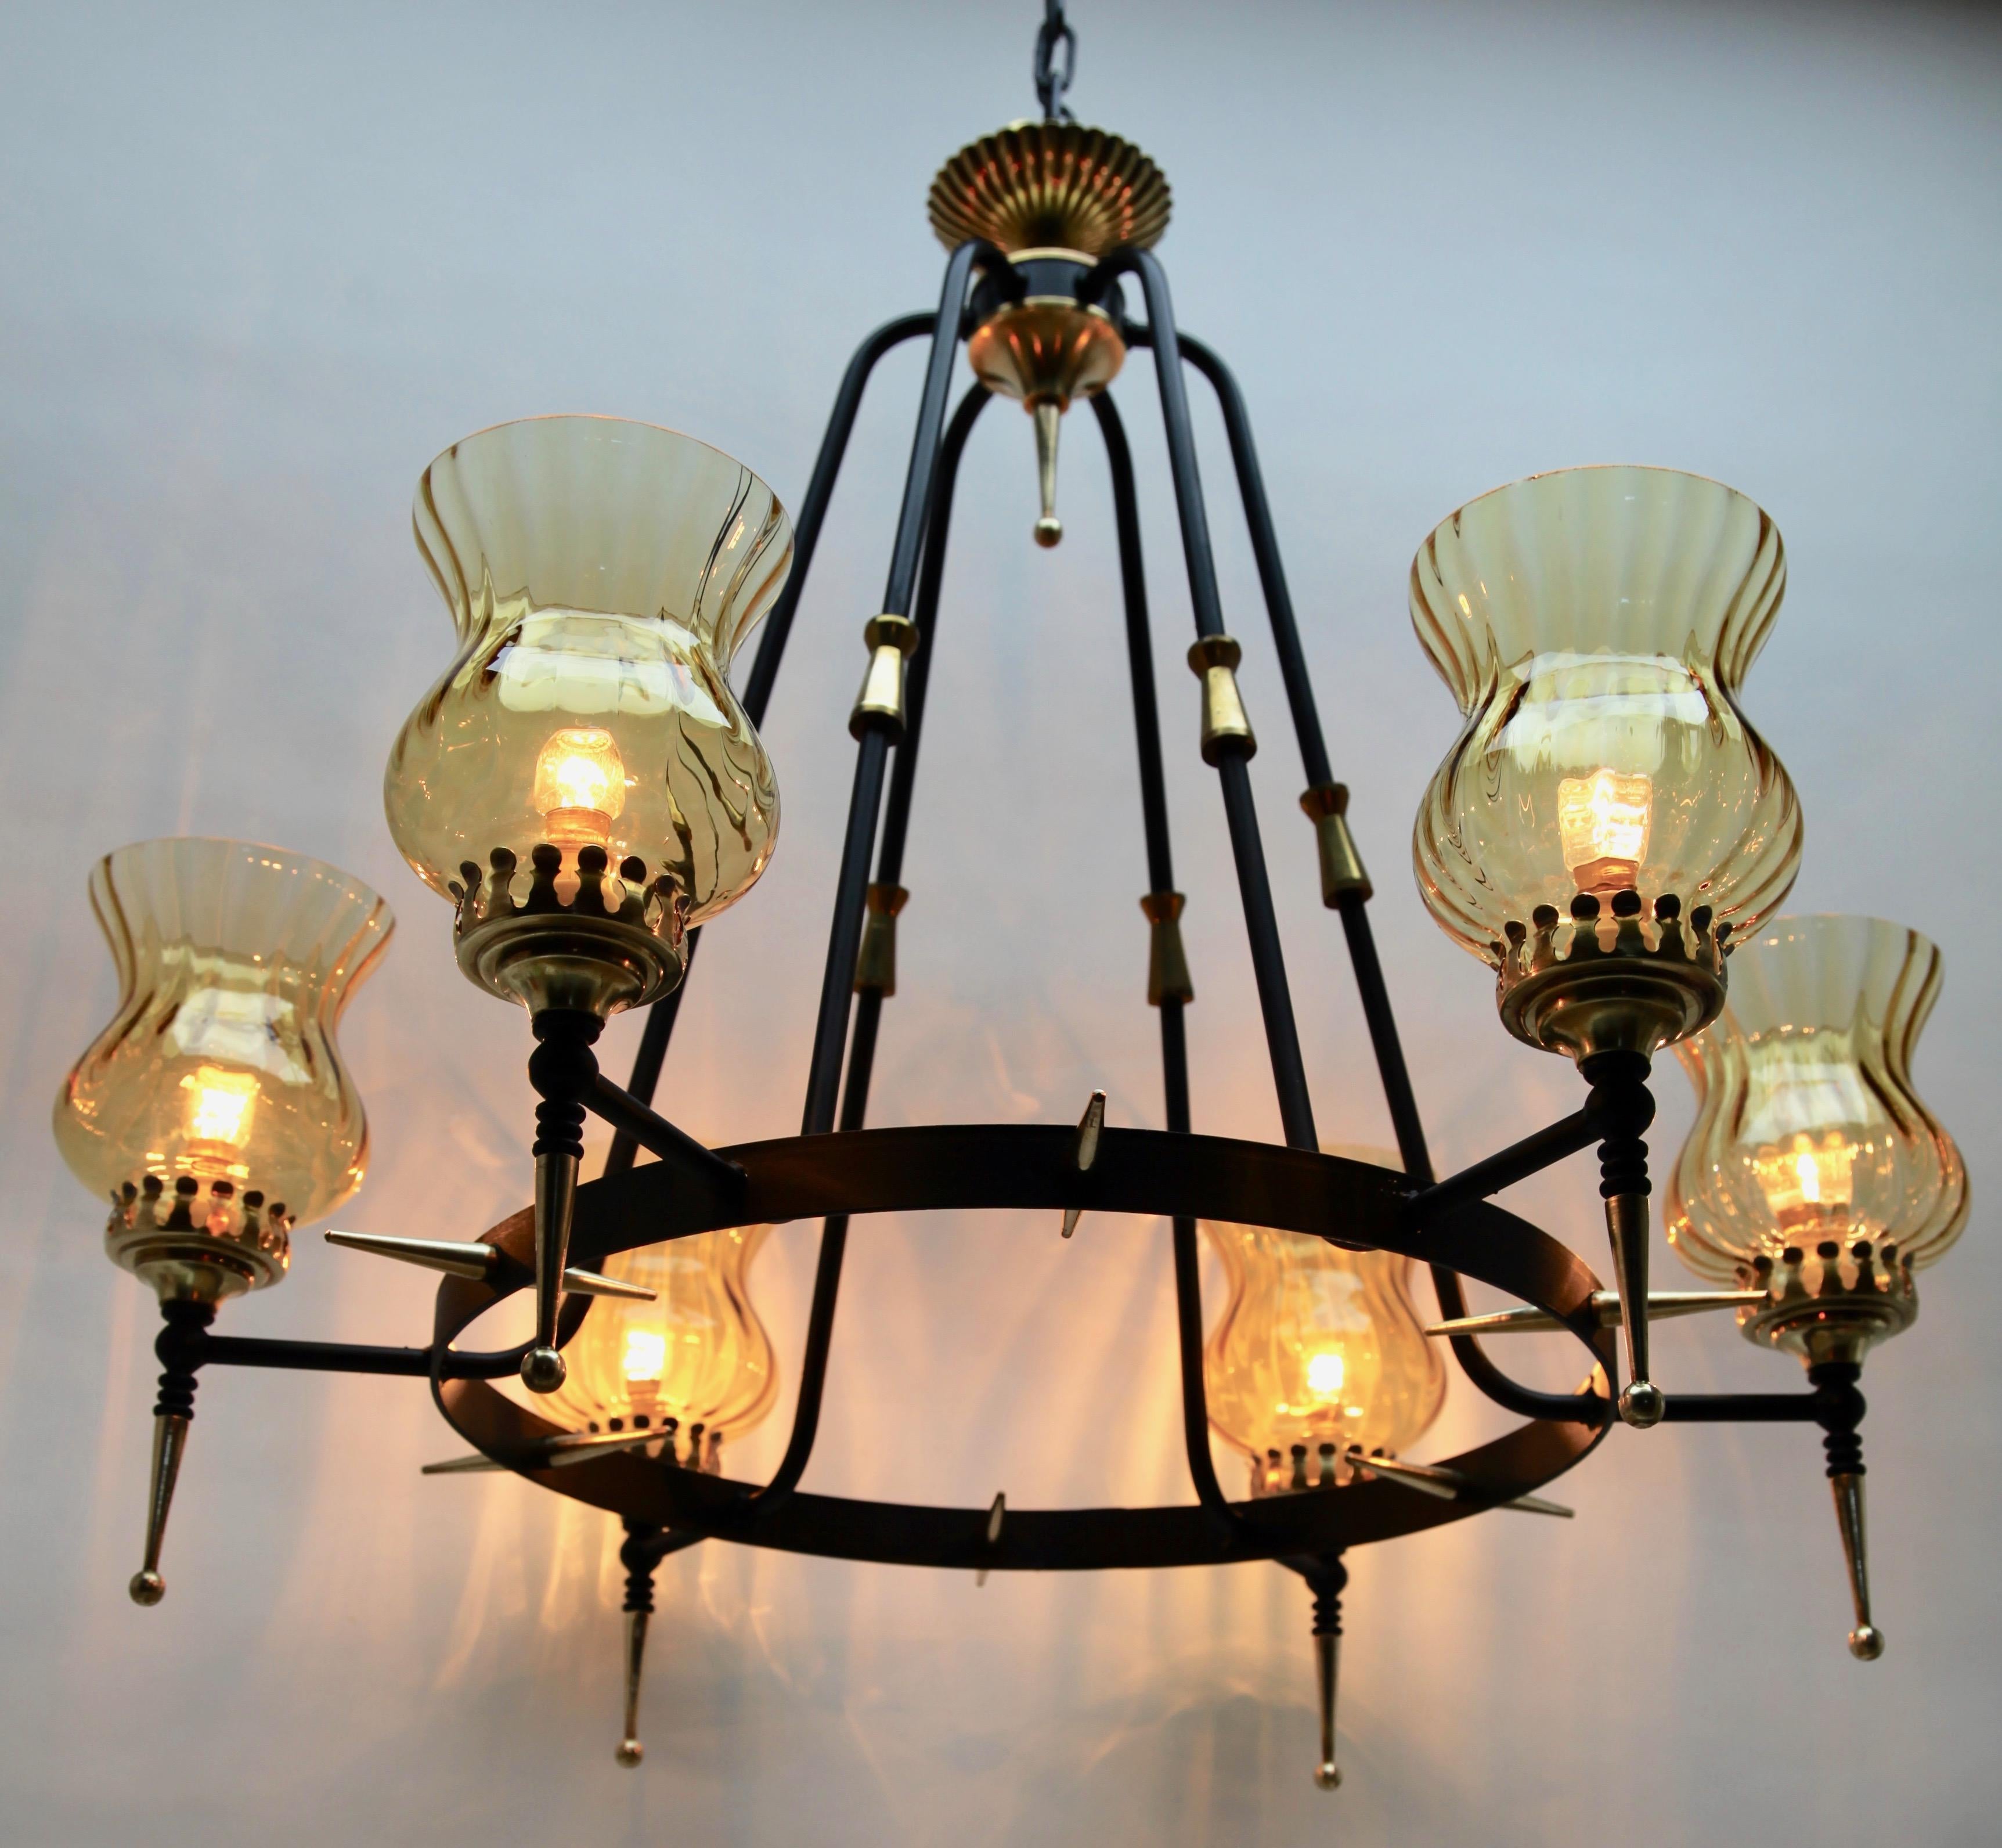 Mid-20th Century Pendant Light Forget Metal and Solid Brass Details Whit Optical Lampshades For Sale